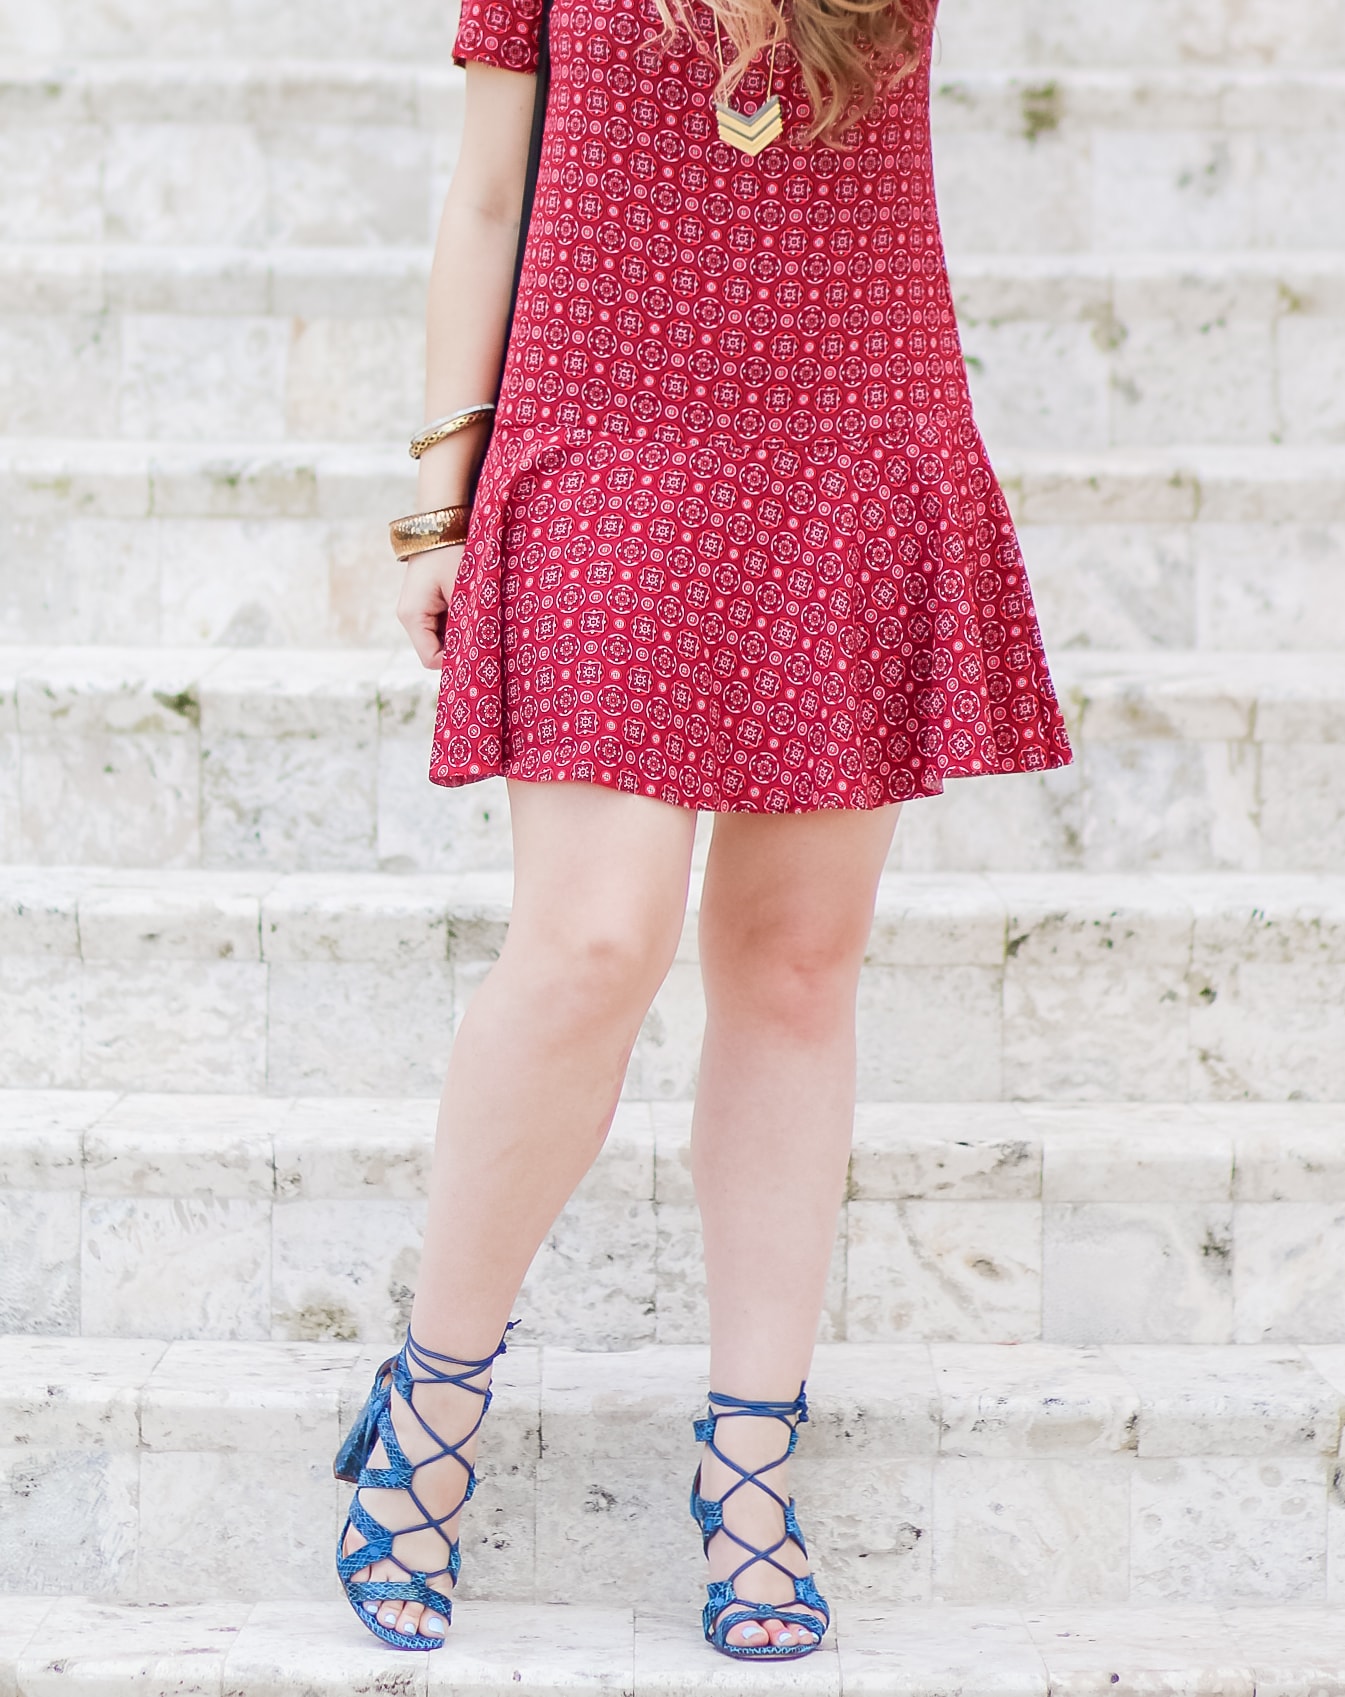 This fluttery skirt couldn't be more perfect for summer, and the shoes are EVERYTHING. I love the Banana Republic Eryn heeled sandals so much, that I ended up buying them in gold too! The lace-up detail is so chic, and they're unbelievably comfortable. 